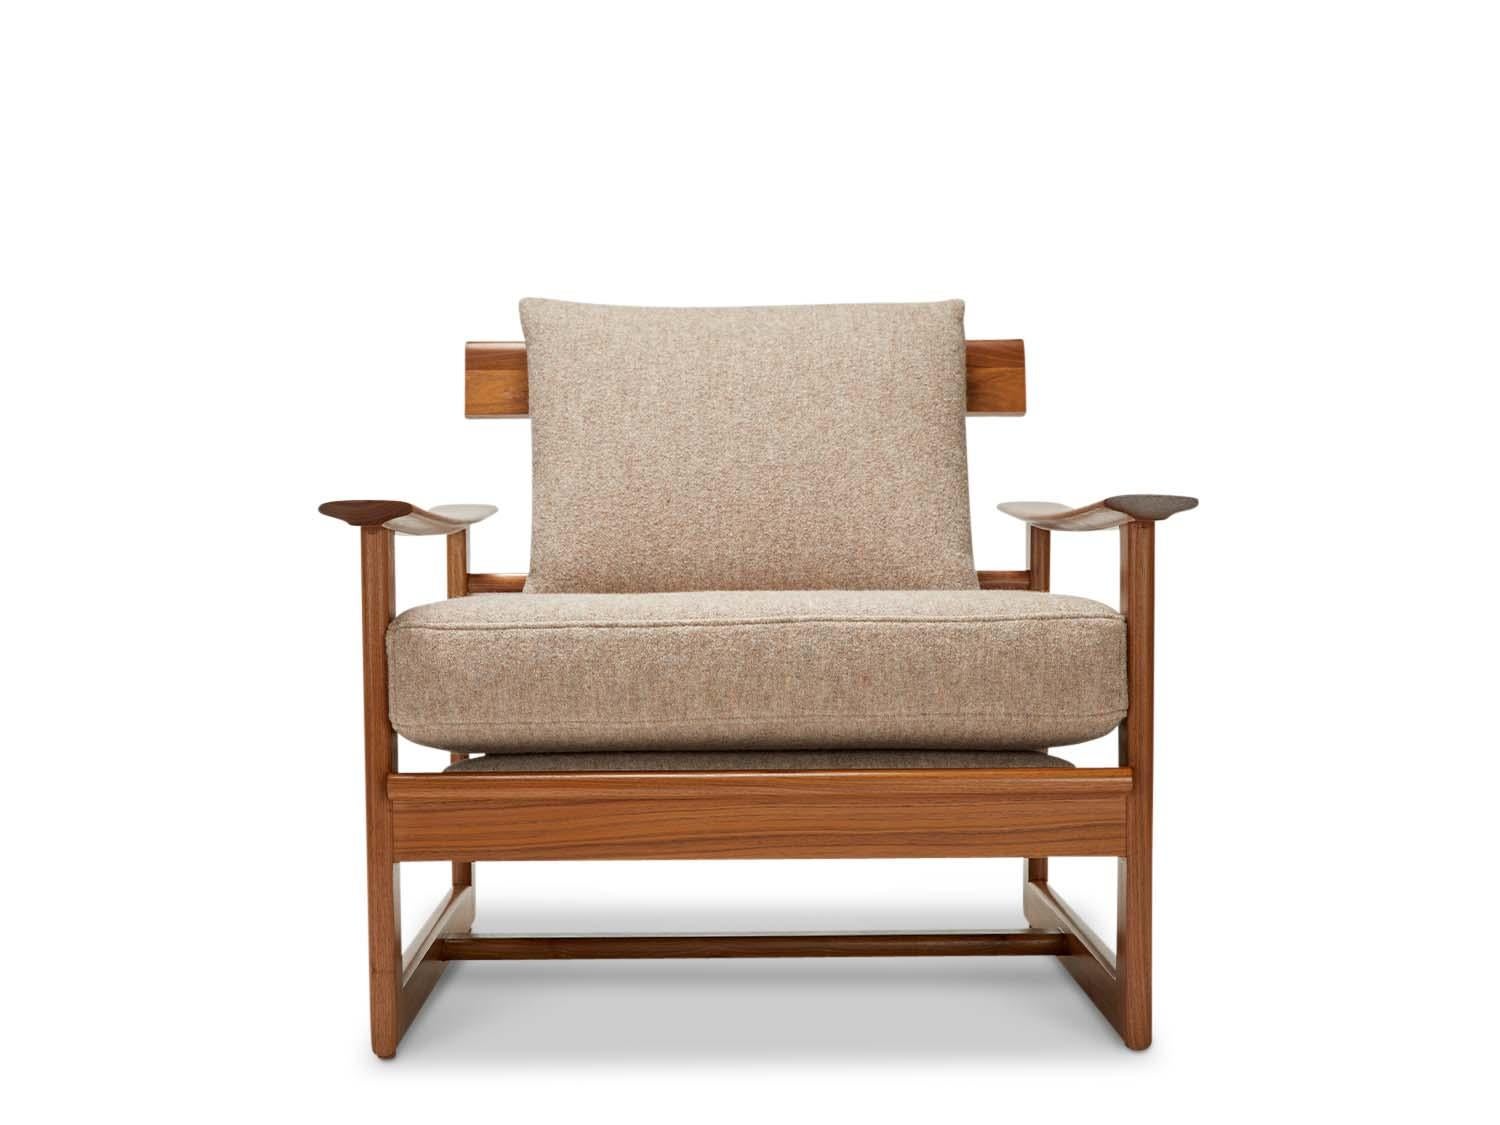 The Inverness chair is a Japanese-inspired spindle chair made of solid oak or walnut. Cushion available in rounded or square.

The Lawson-Fenning Collection is designed and handmade in Los Angeles, California. Reach out to discover what options are